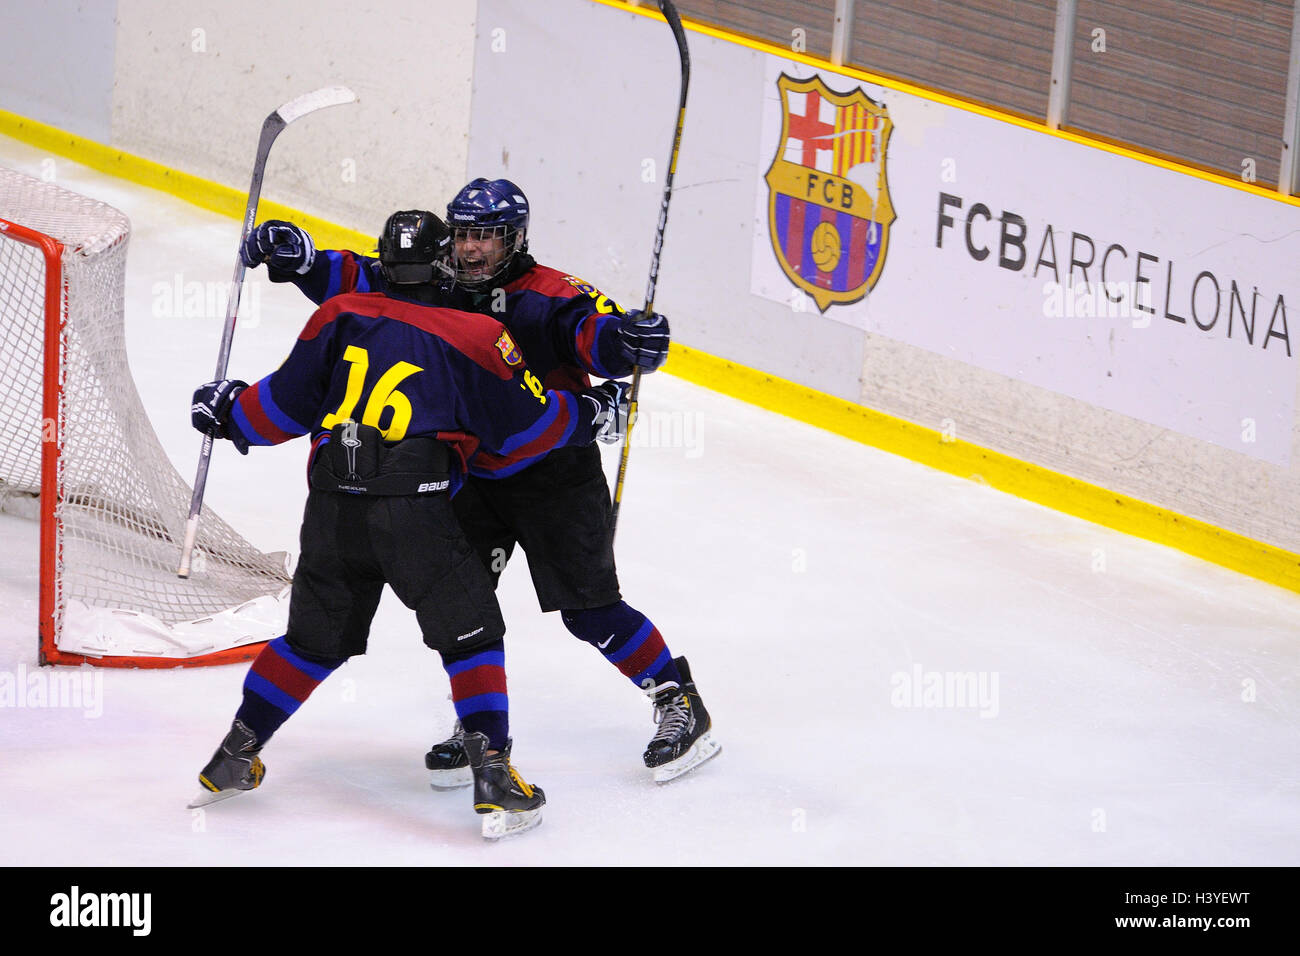 BARCELONA - MAY 11: Players in action in the Ice Hockey final of the Copa  del Rey (Spanish Cup Stock Photo - Alamy